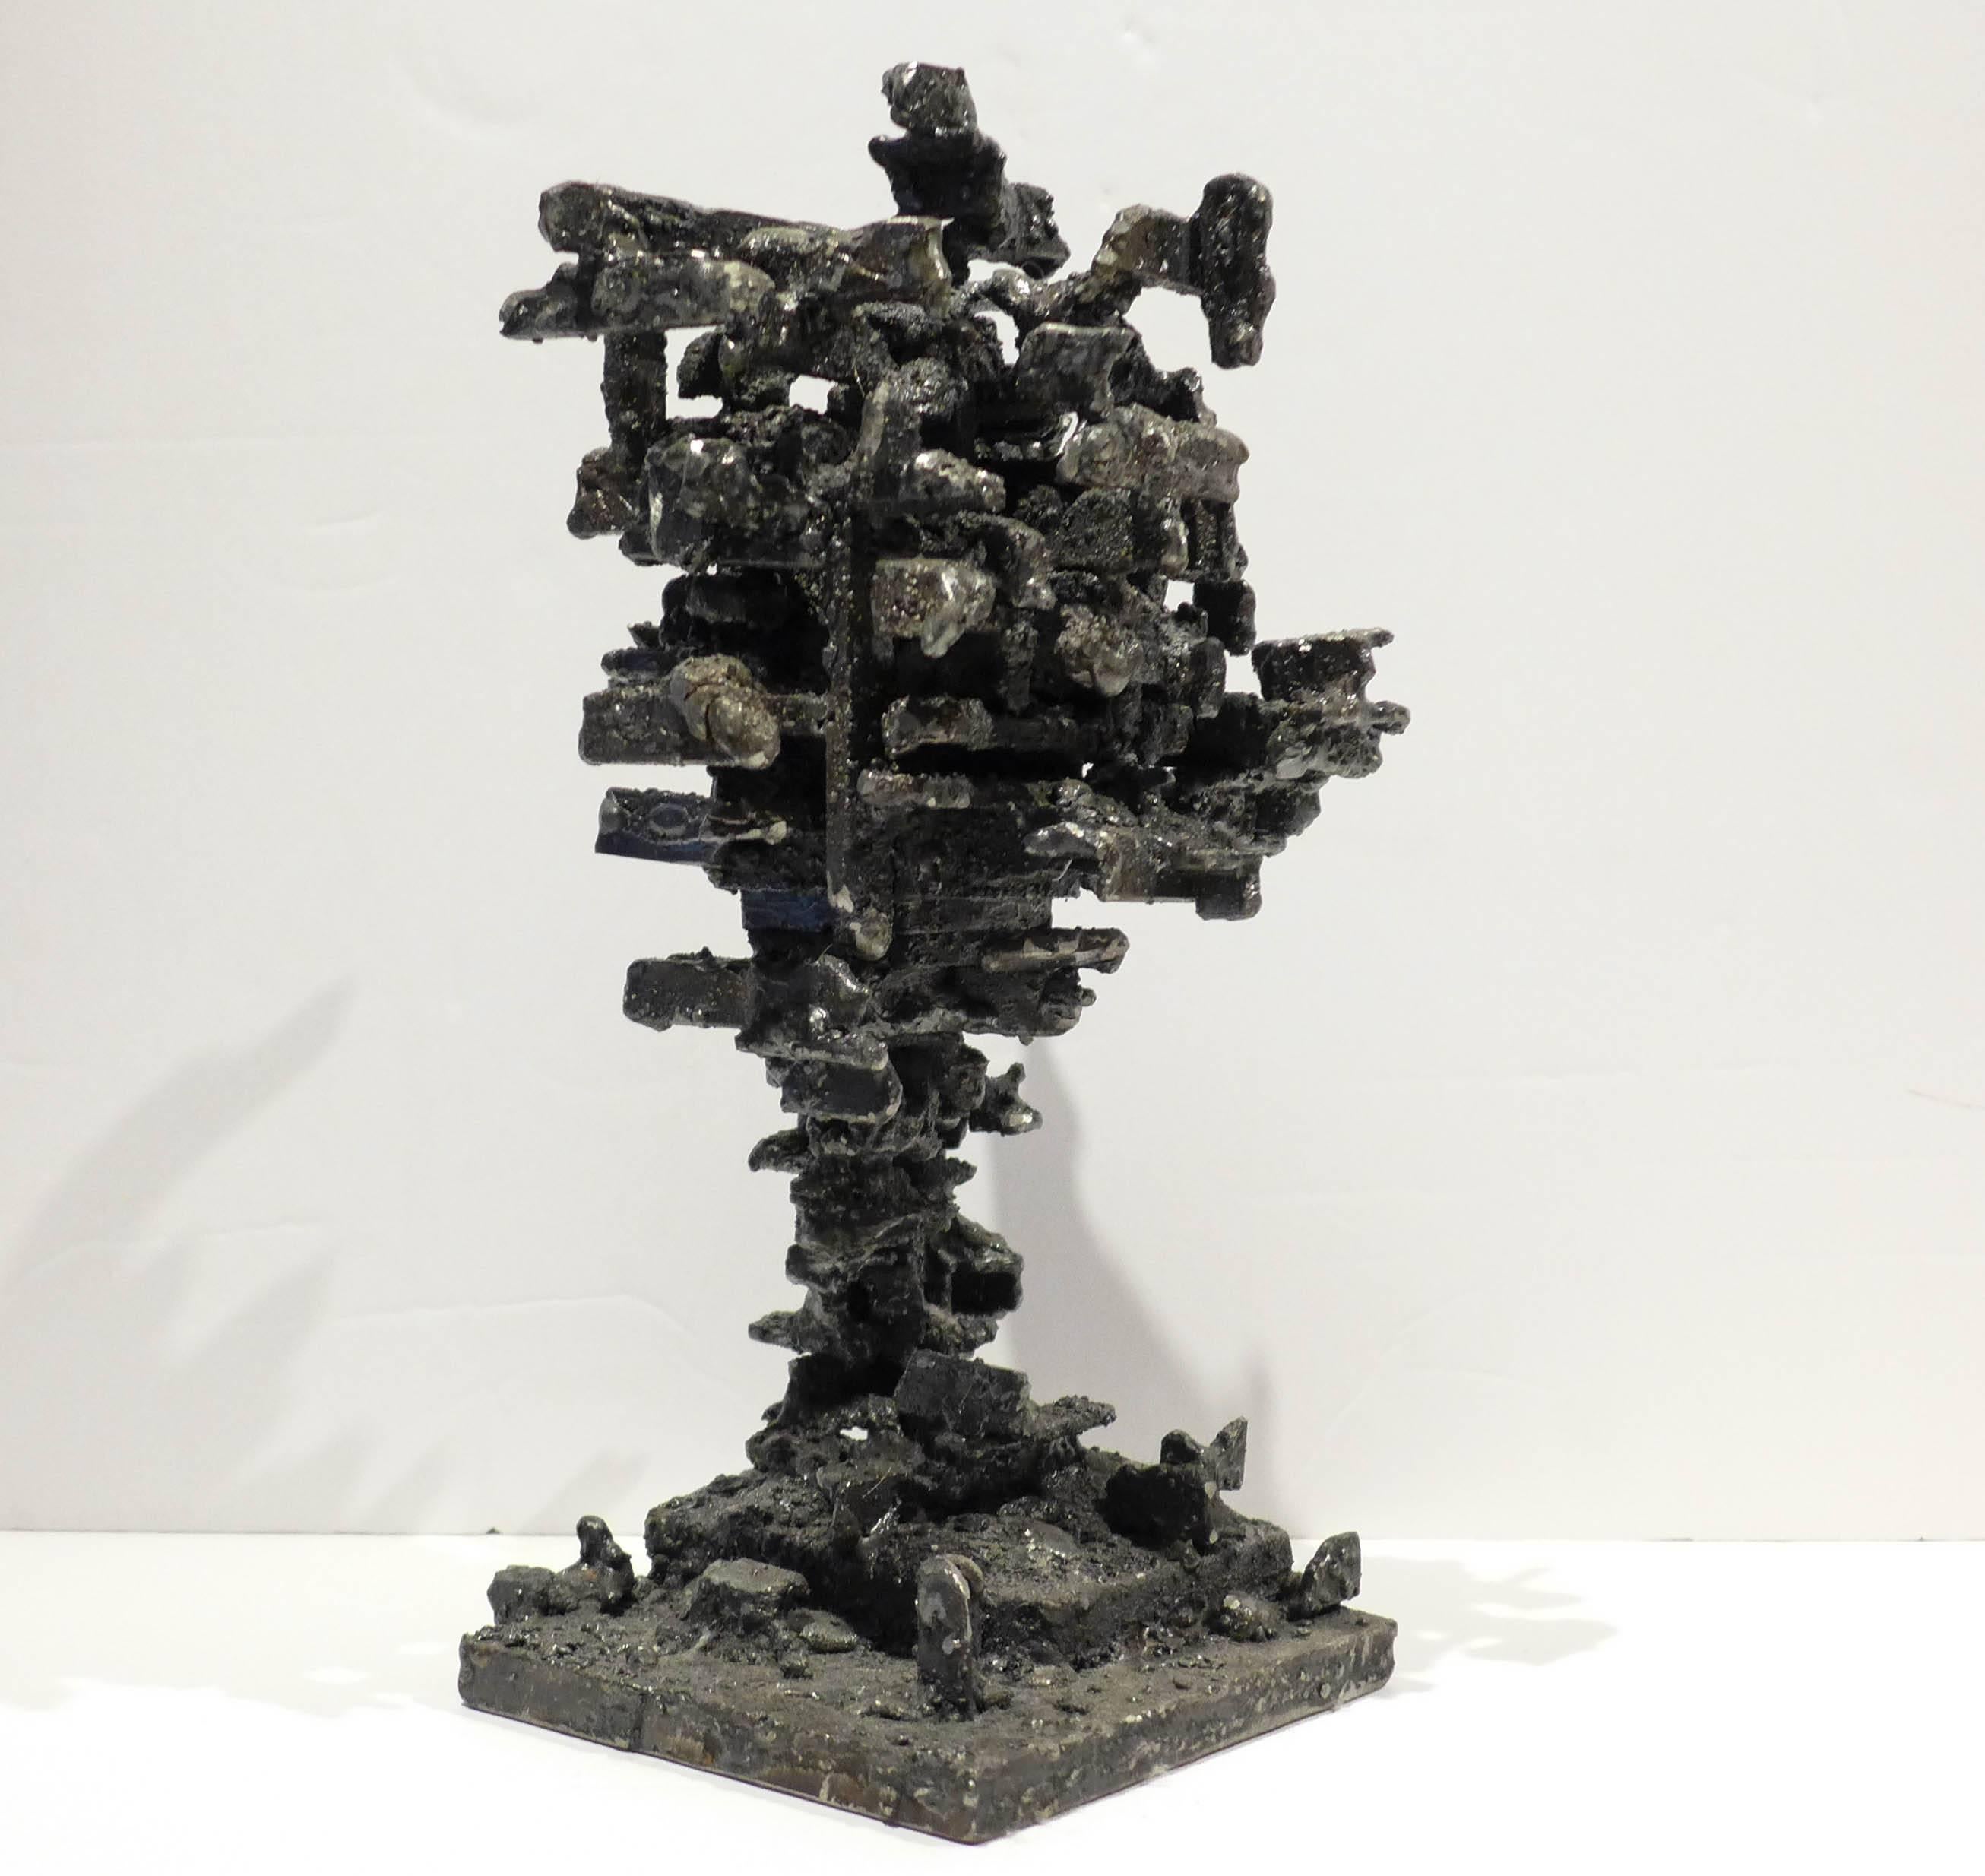 Sculptural box of blackened and polished steel, raised atop a slender column. From the Dwelling series, 2015, by Des Moines artist James Anthony Bearden.